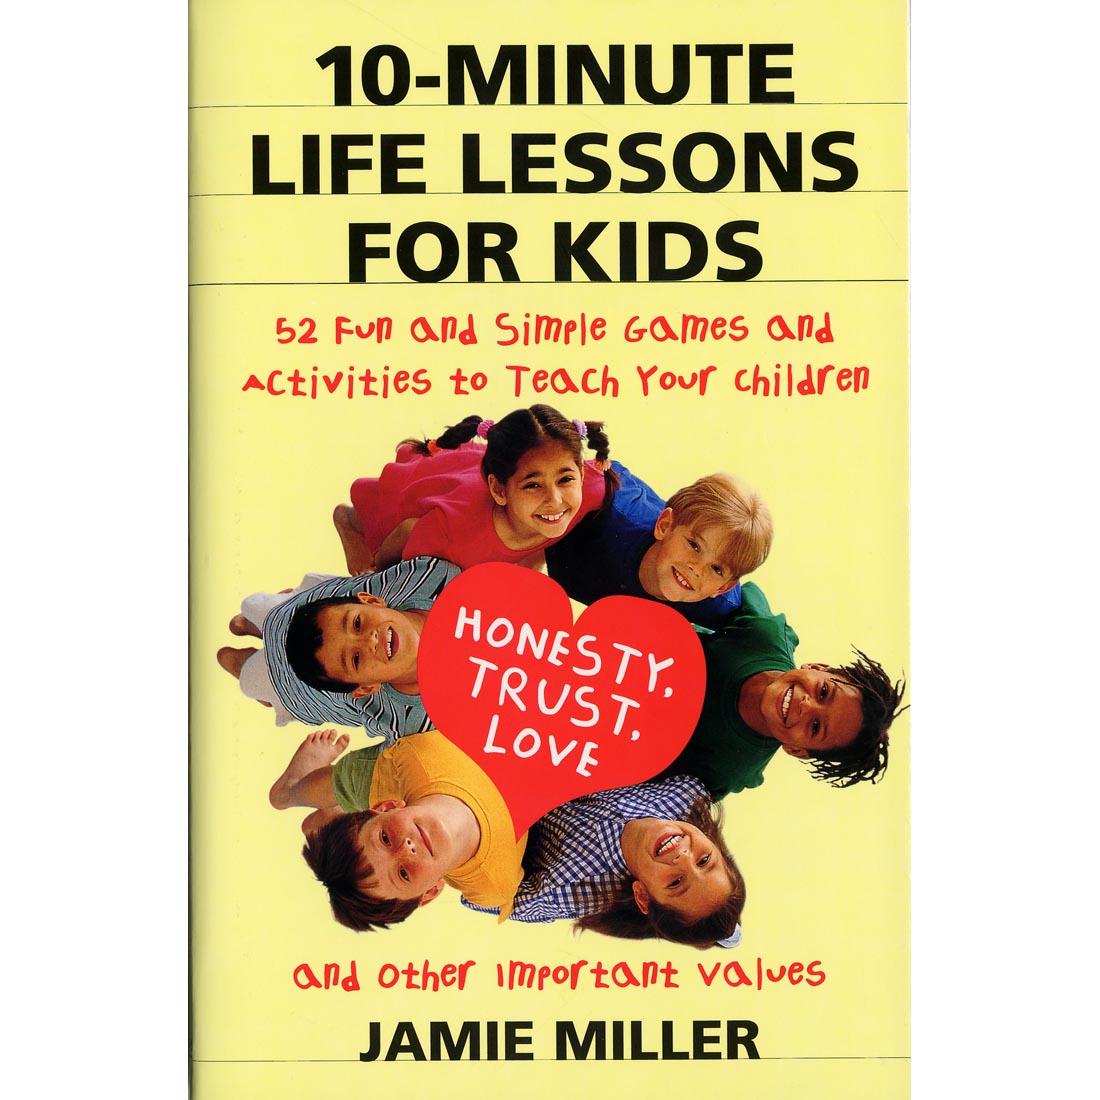 10-Minute Life Lessons For Kids